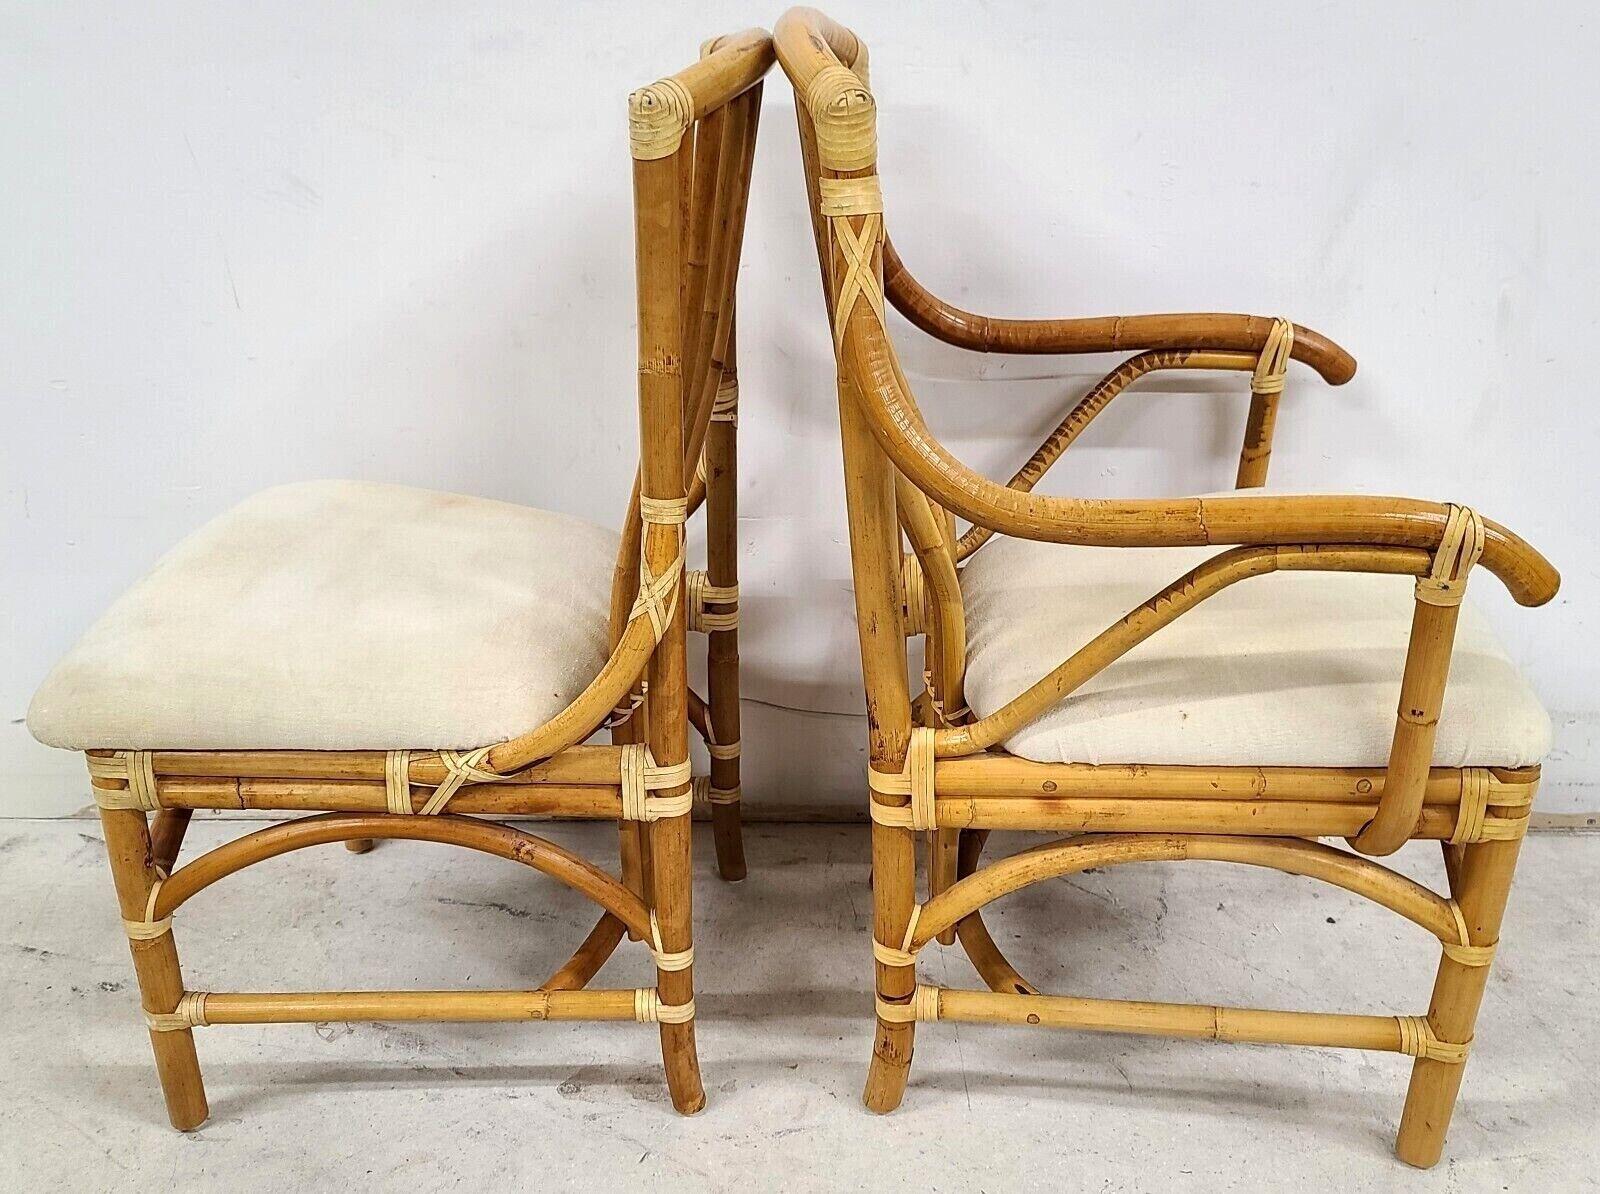 Vintage 1970s Bamboo Rattan Chairs, Set of 4 For Sale 5